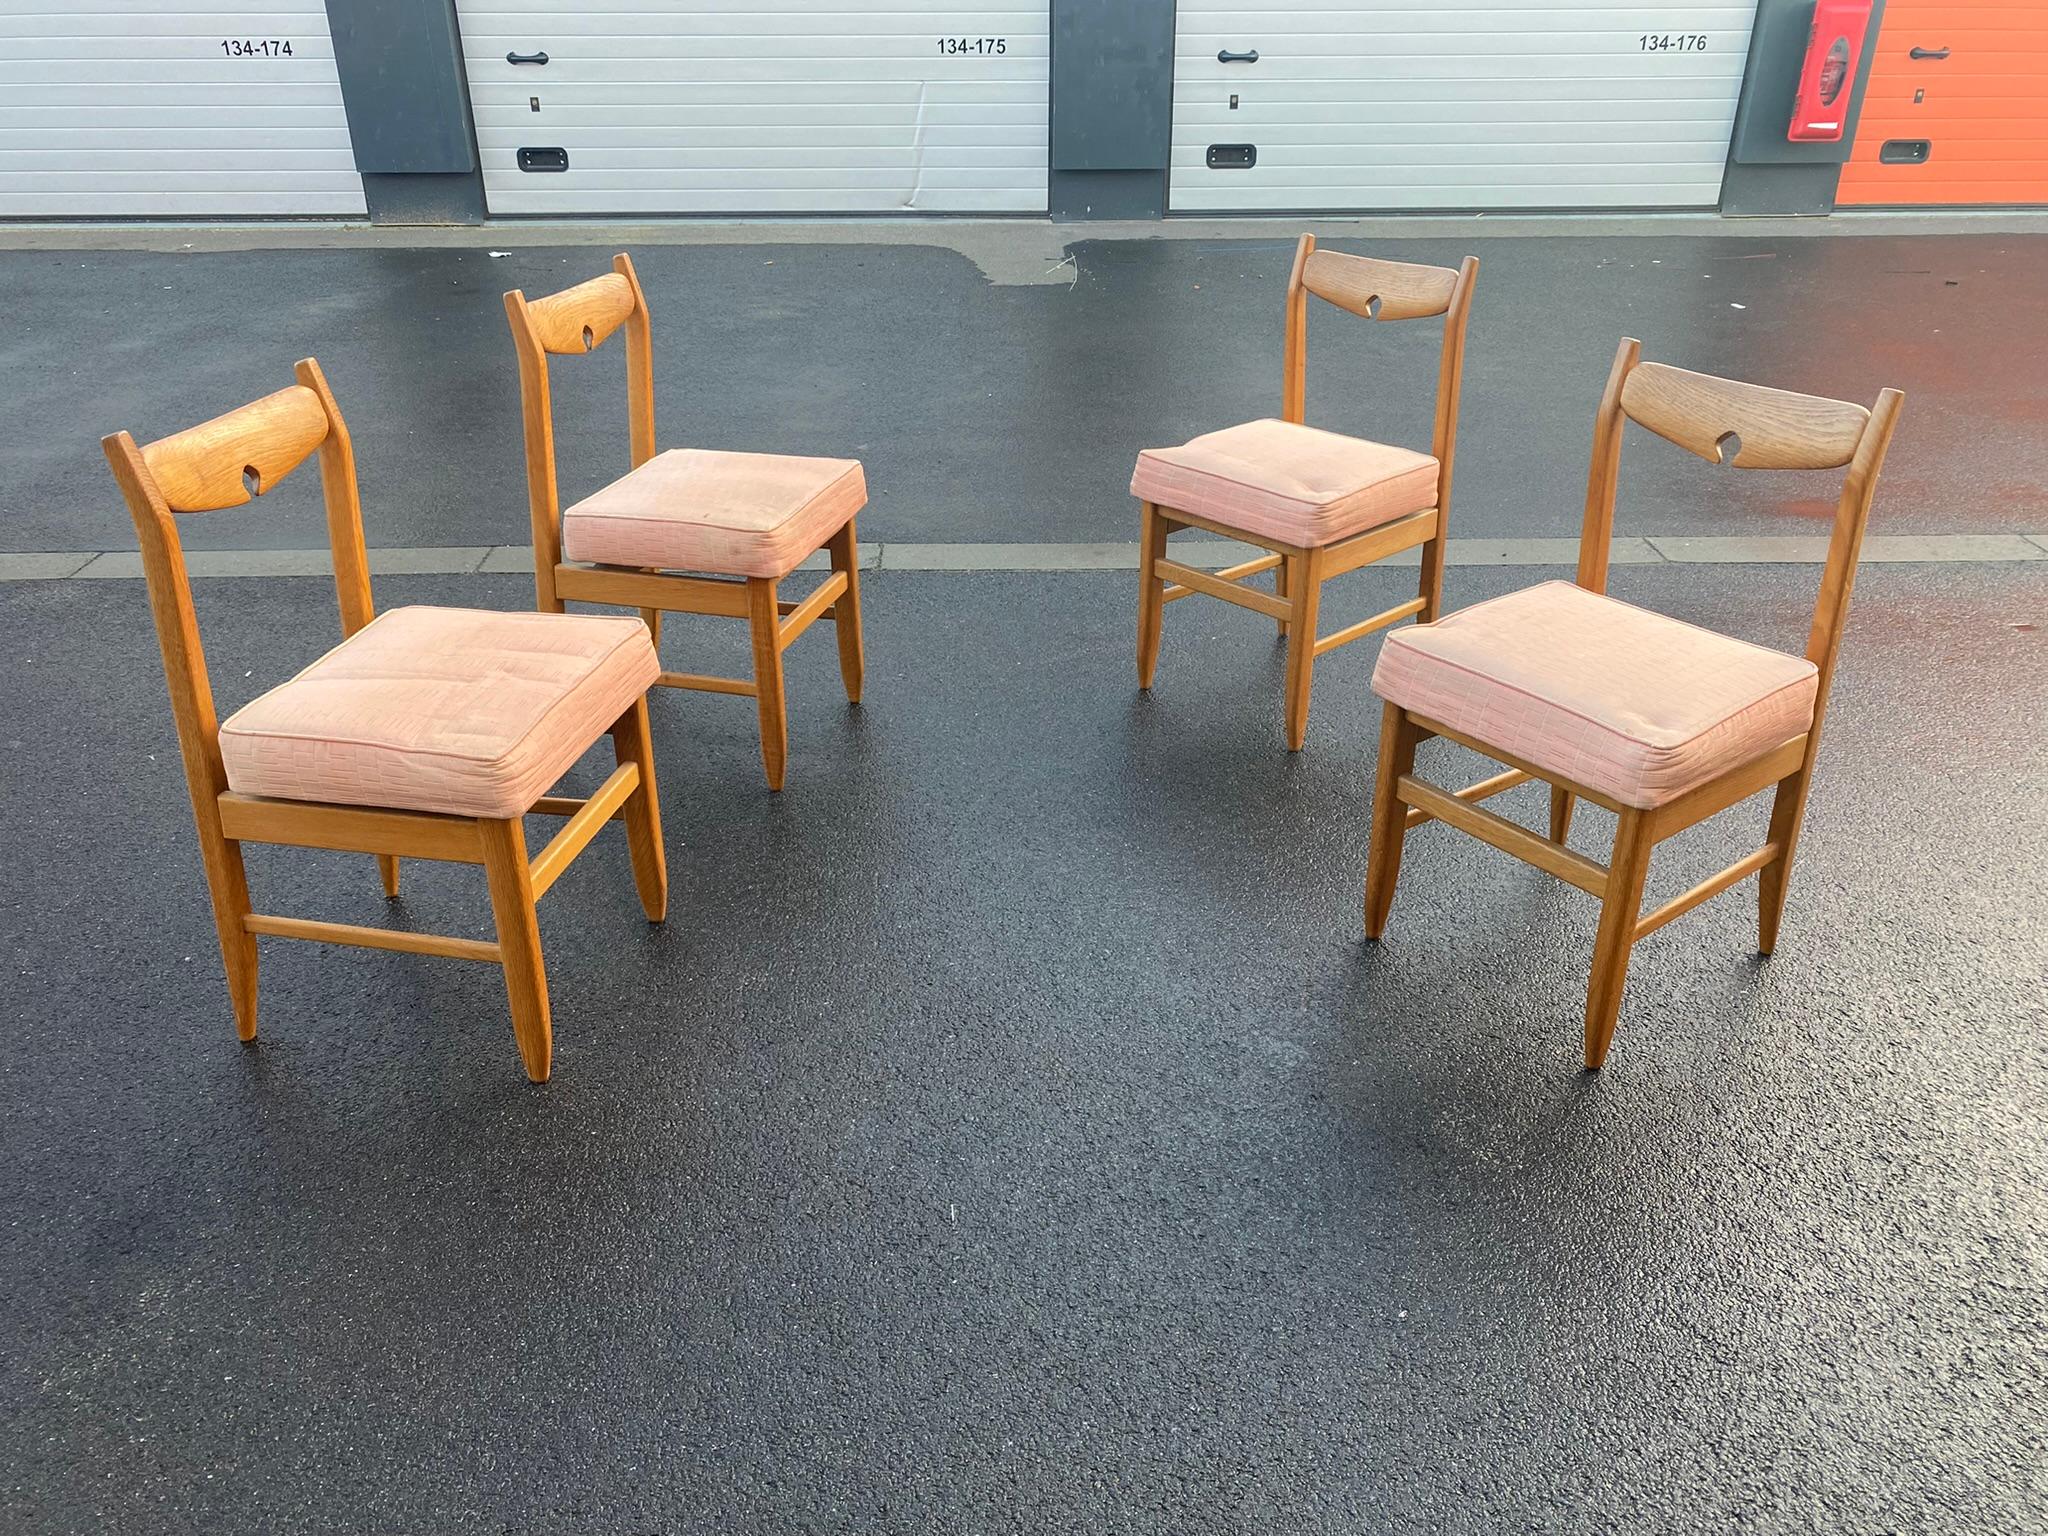 Guillerme et Chambron, set of four oak chairs, Edition Votre Maison circa 1970
The seats are not original and a little too thick.